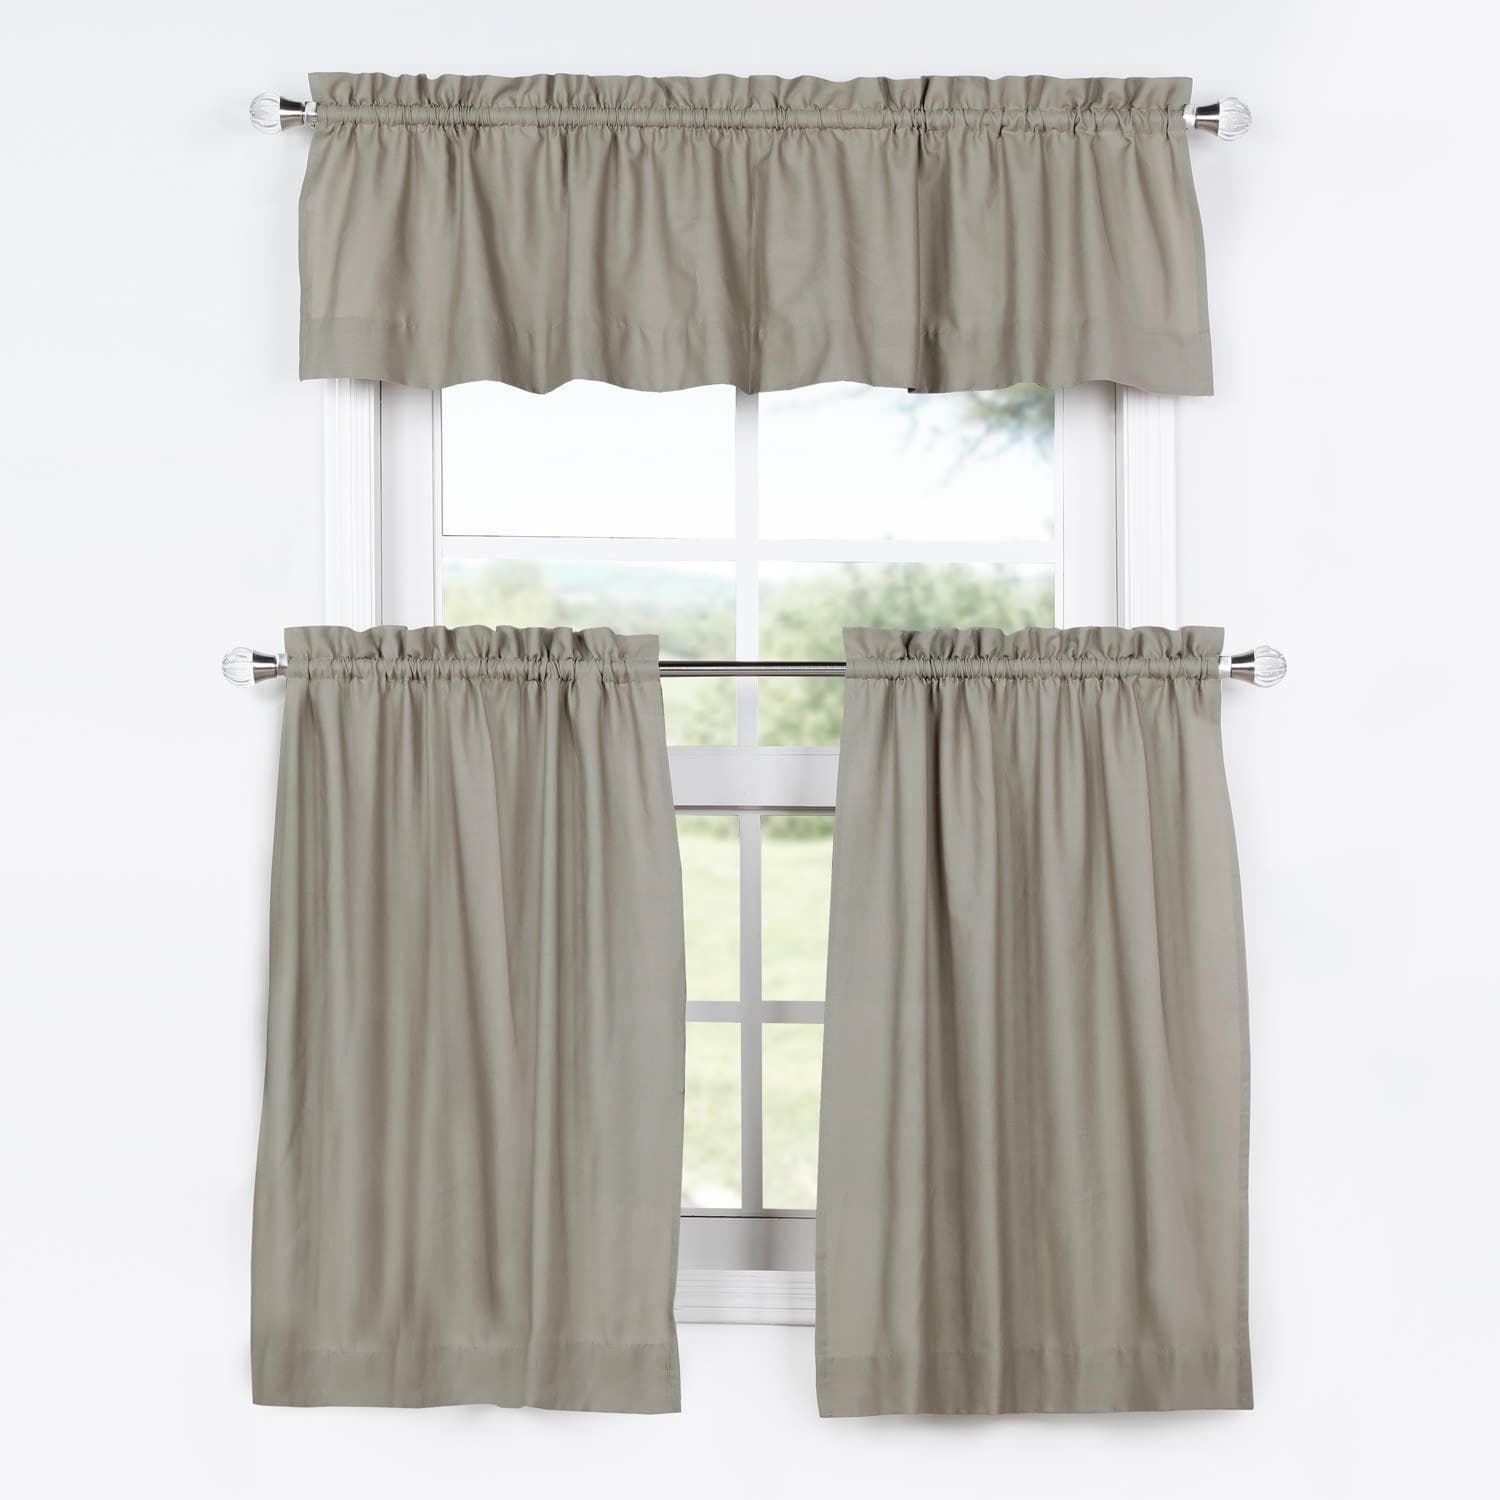 Millstone Gray Solid Cotton Kitchen Tier Curtain & Valance With Regard To Imperial Flower Jacquard Tier And Valance Kitchen Curtain Sets (View 10 of 20)